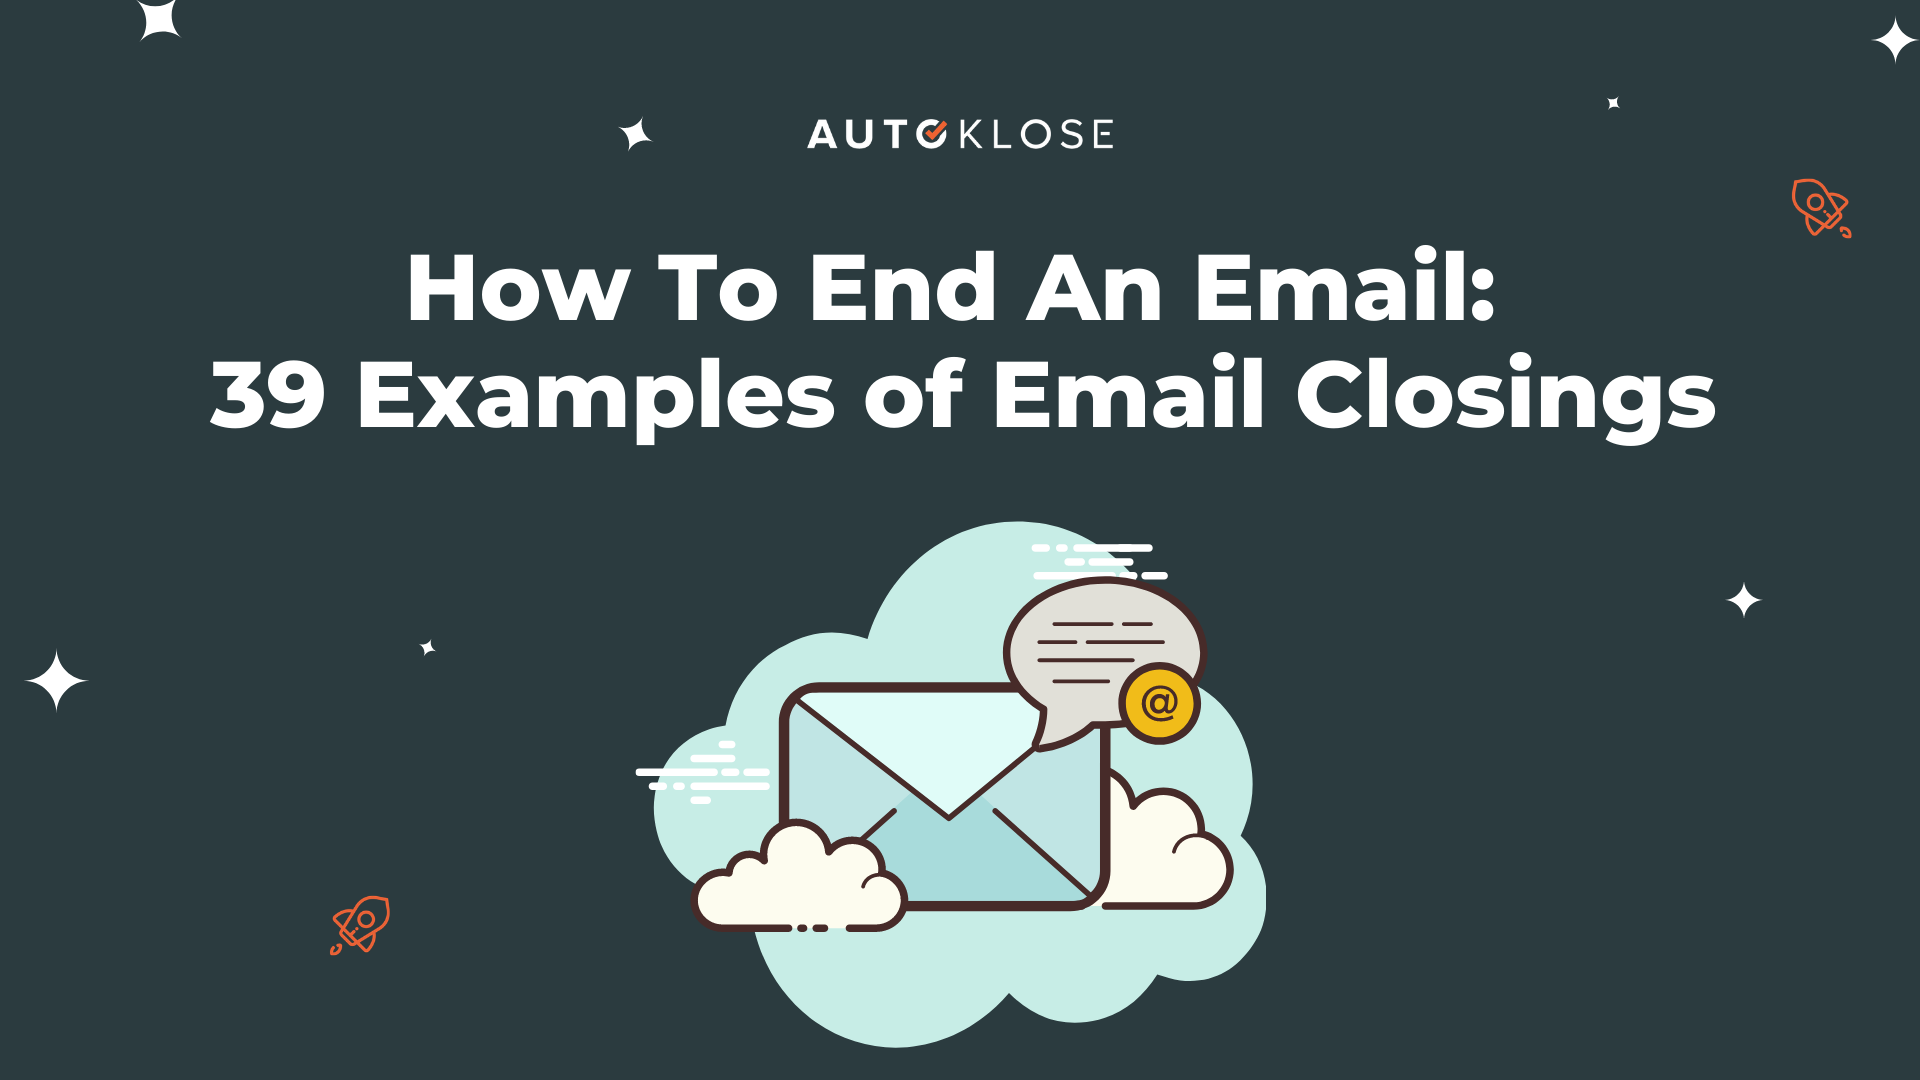 How To End An Email: 39 Examples of Email Closings